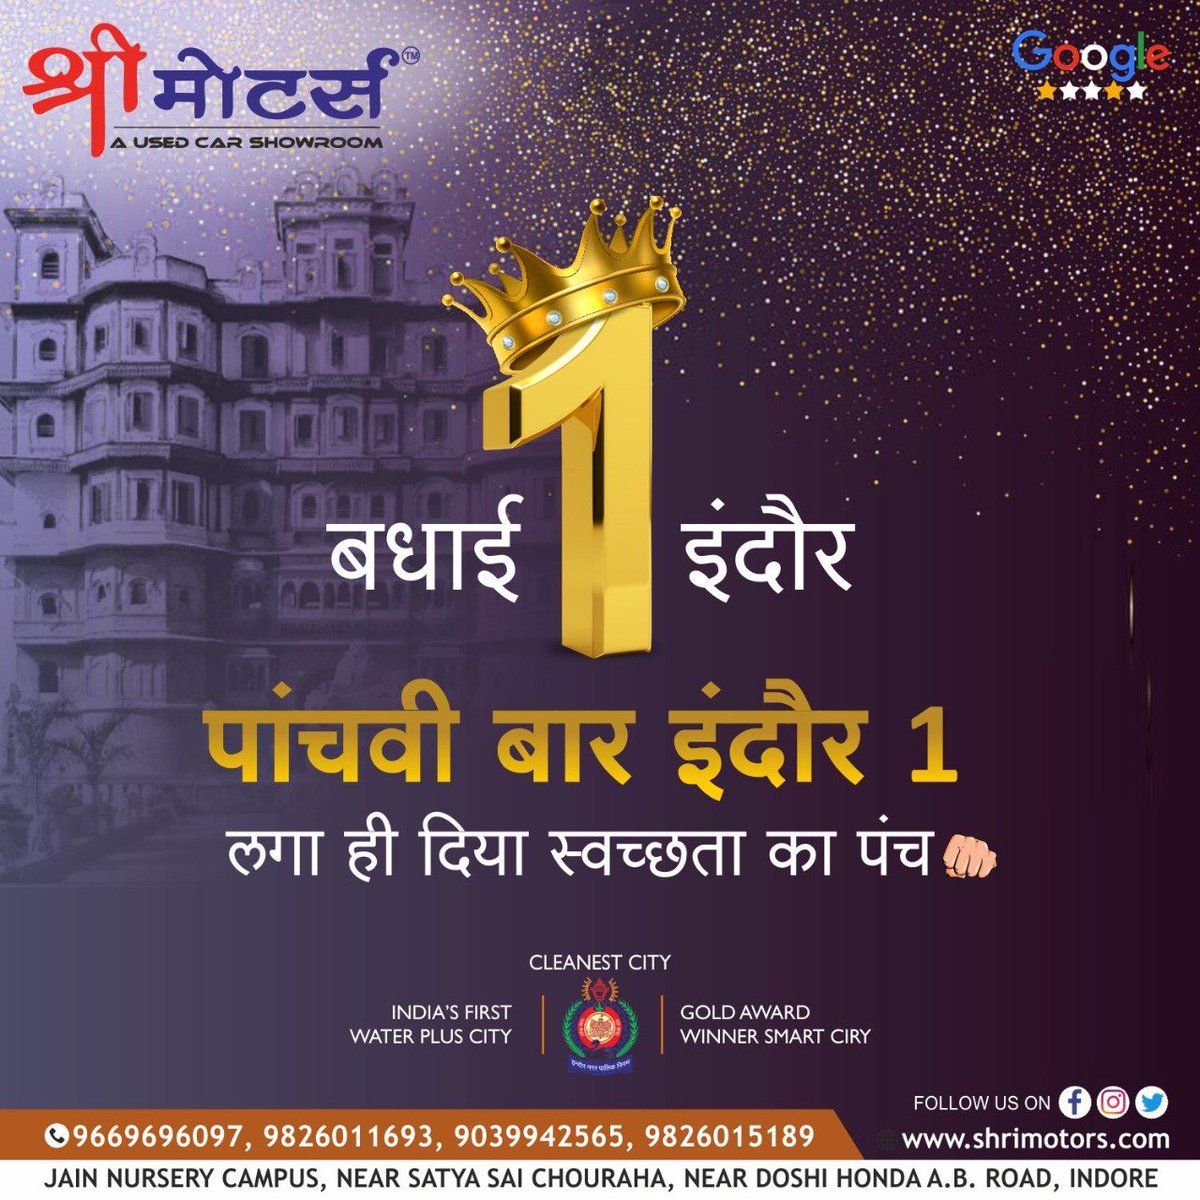 Indore adjudged the cleanest city of the nation for the fifth time in a row.

_
#shrimotorsindore 
#Indore #IndoreNumberOne #SwachhtaSurvekshan #SwachhBharatMission #SwachhtaKaPunch #IndoreNo1 #indore #smartcityindore